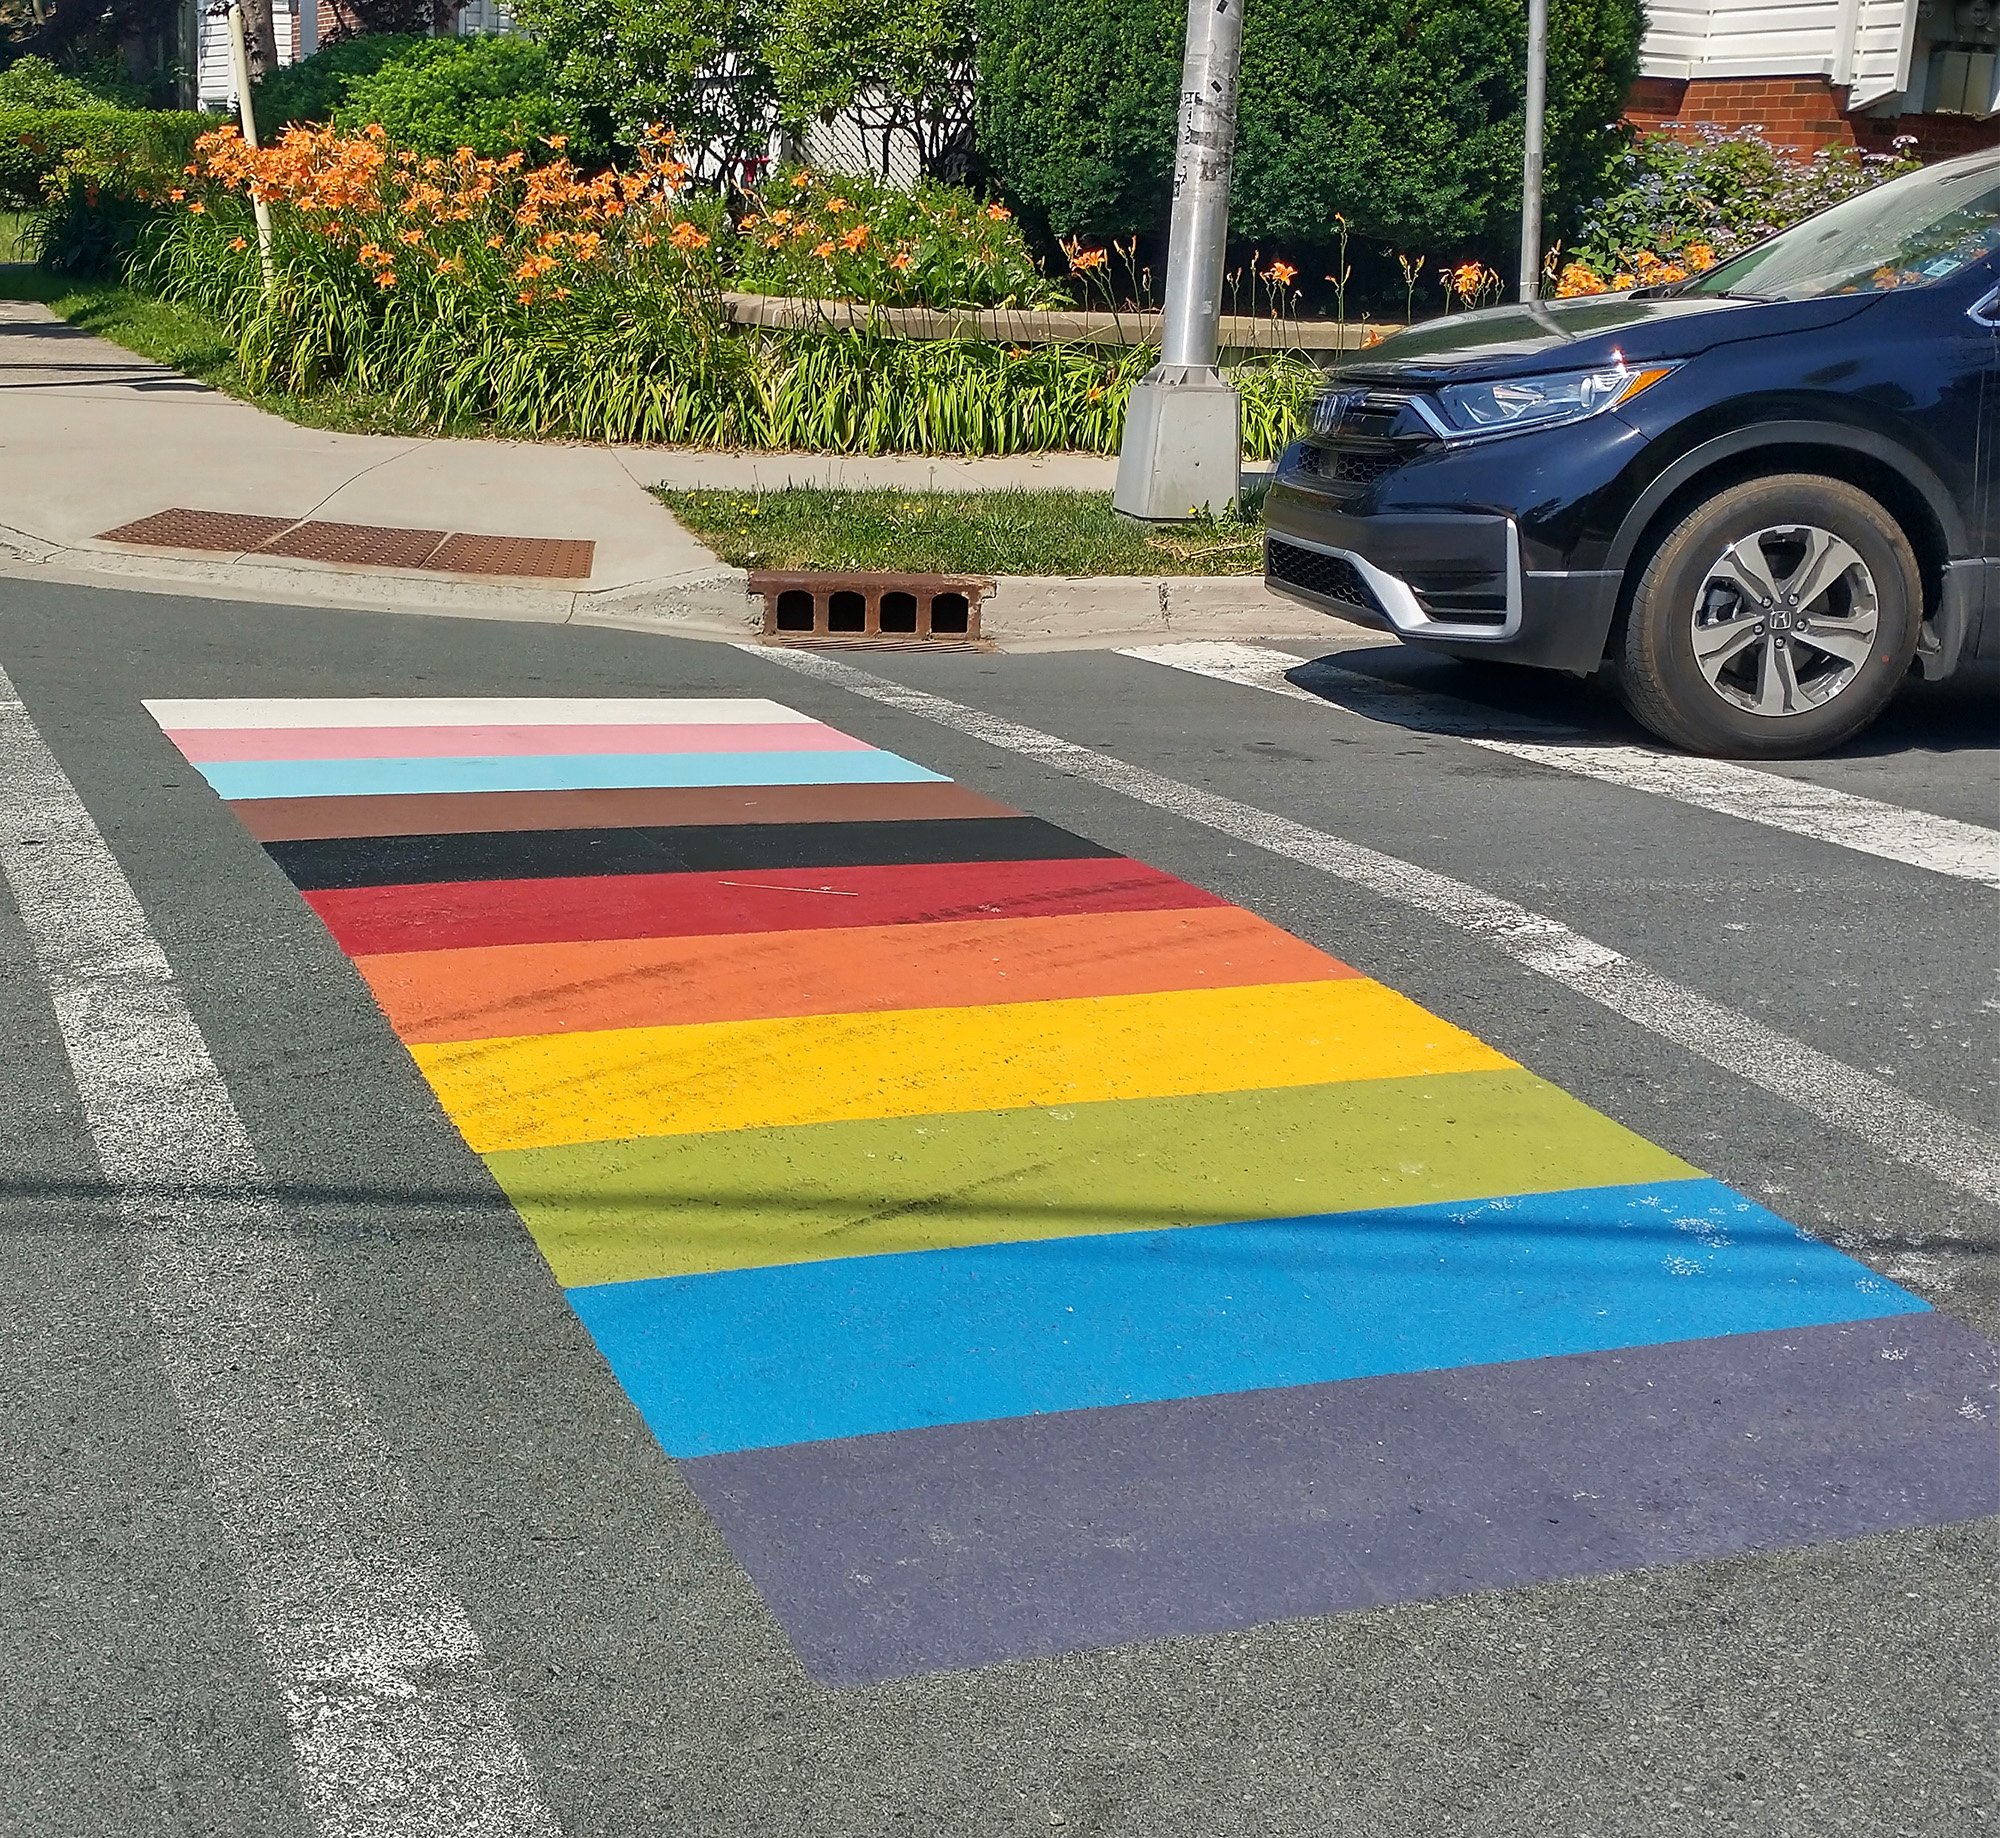 Another big Canadian city trend are these rainbow colored crosswalks.